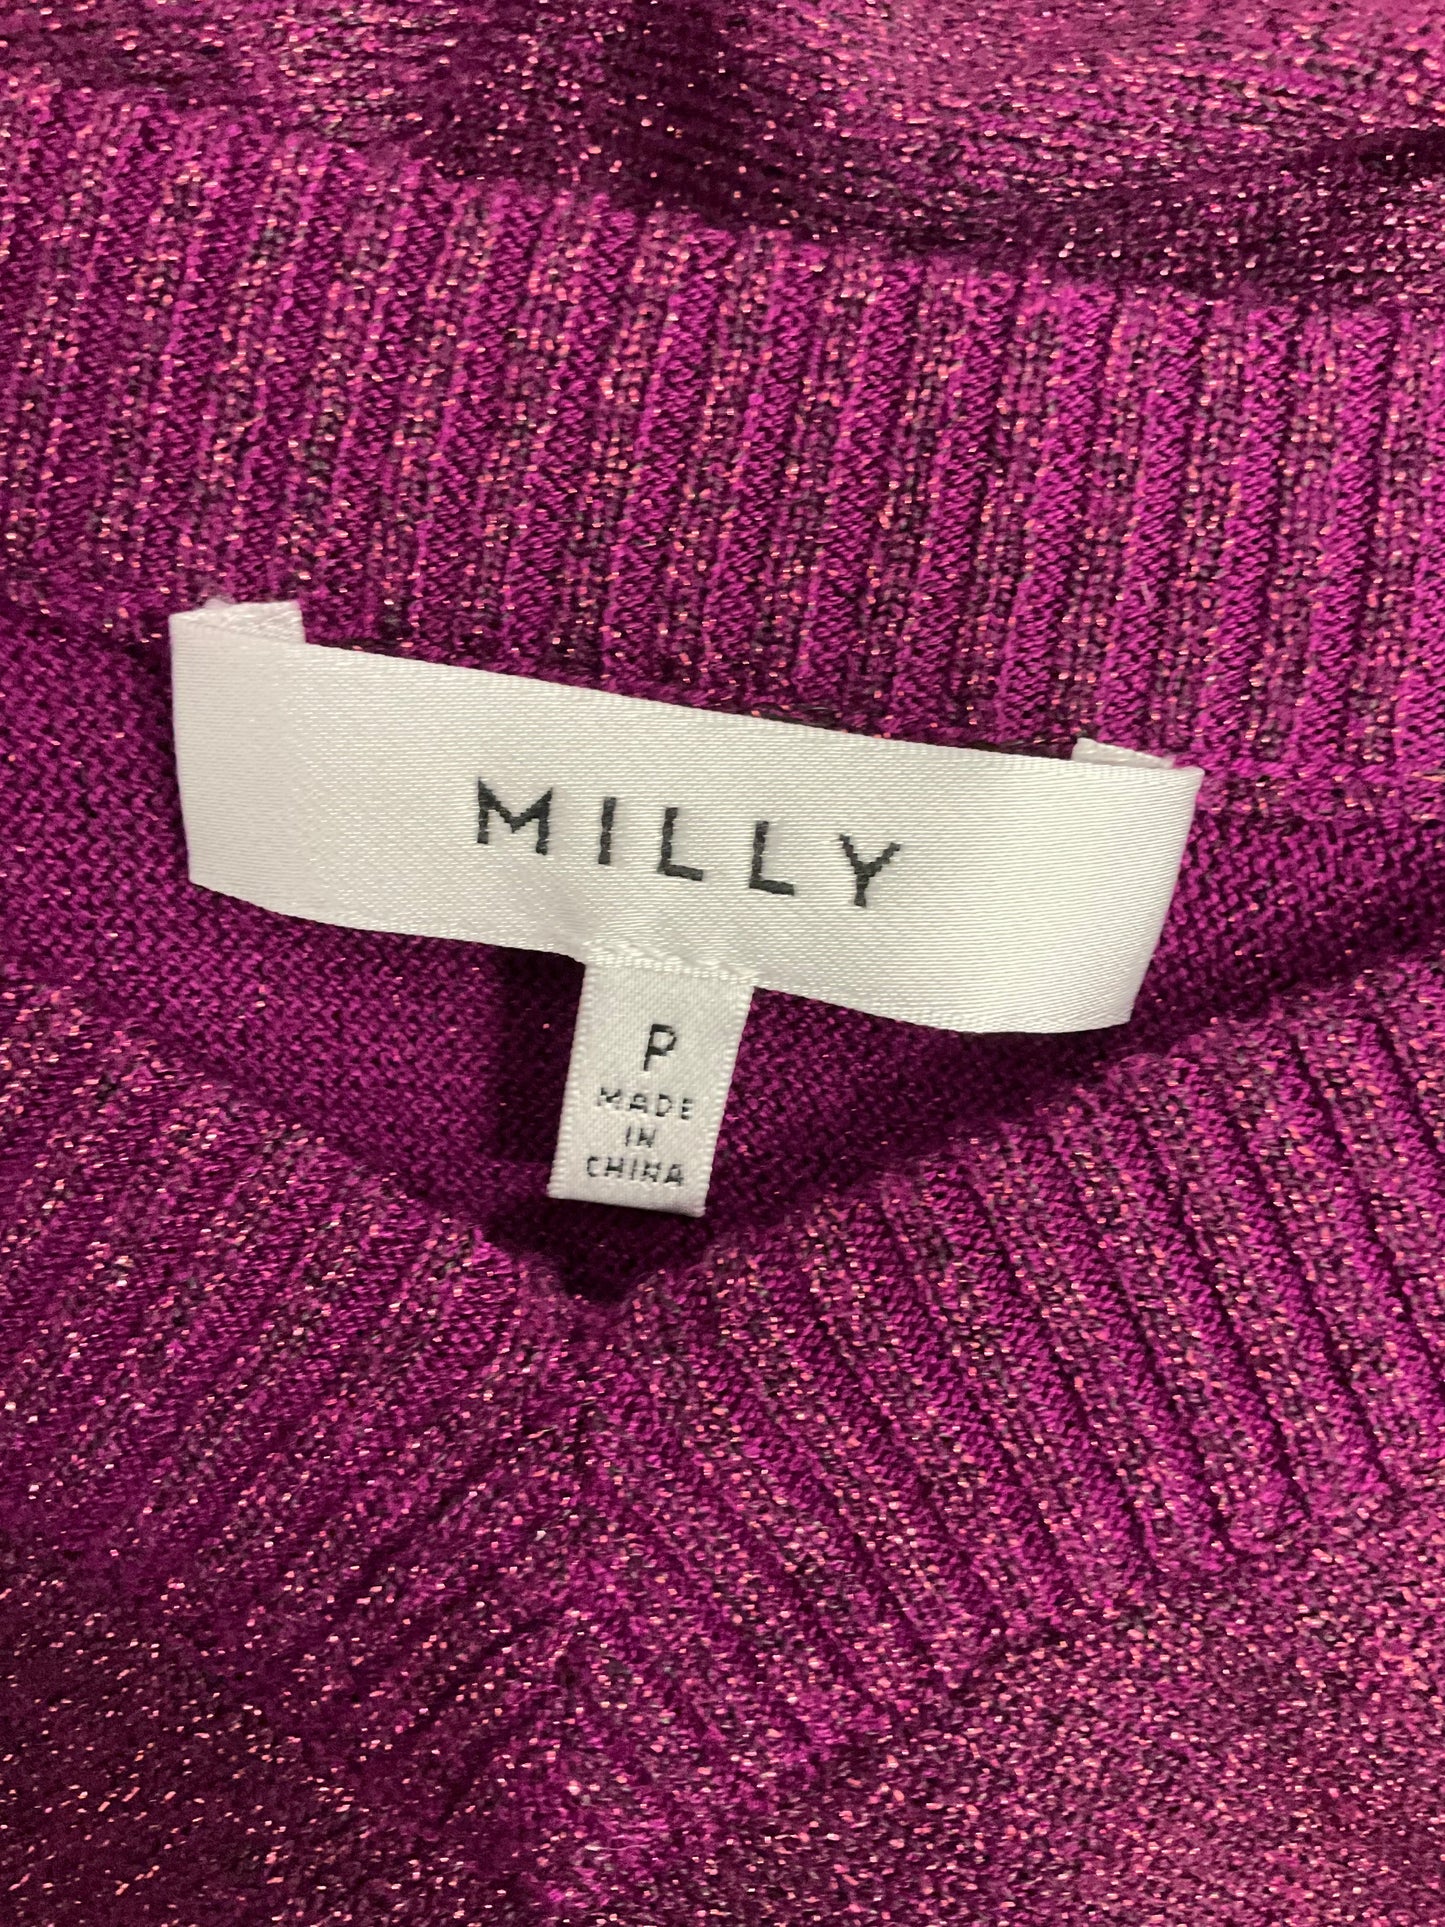 Sweater By Milly  Size: Petite